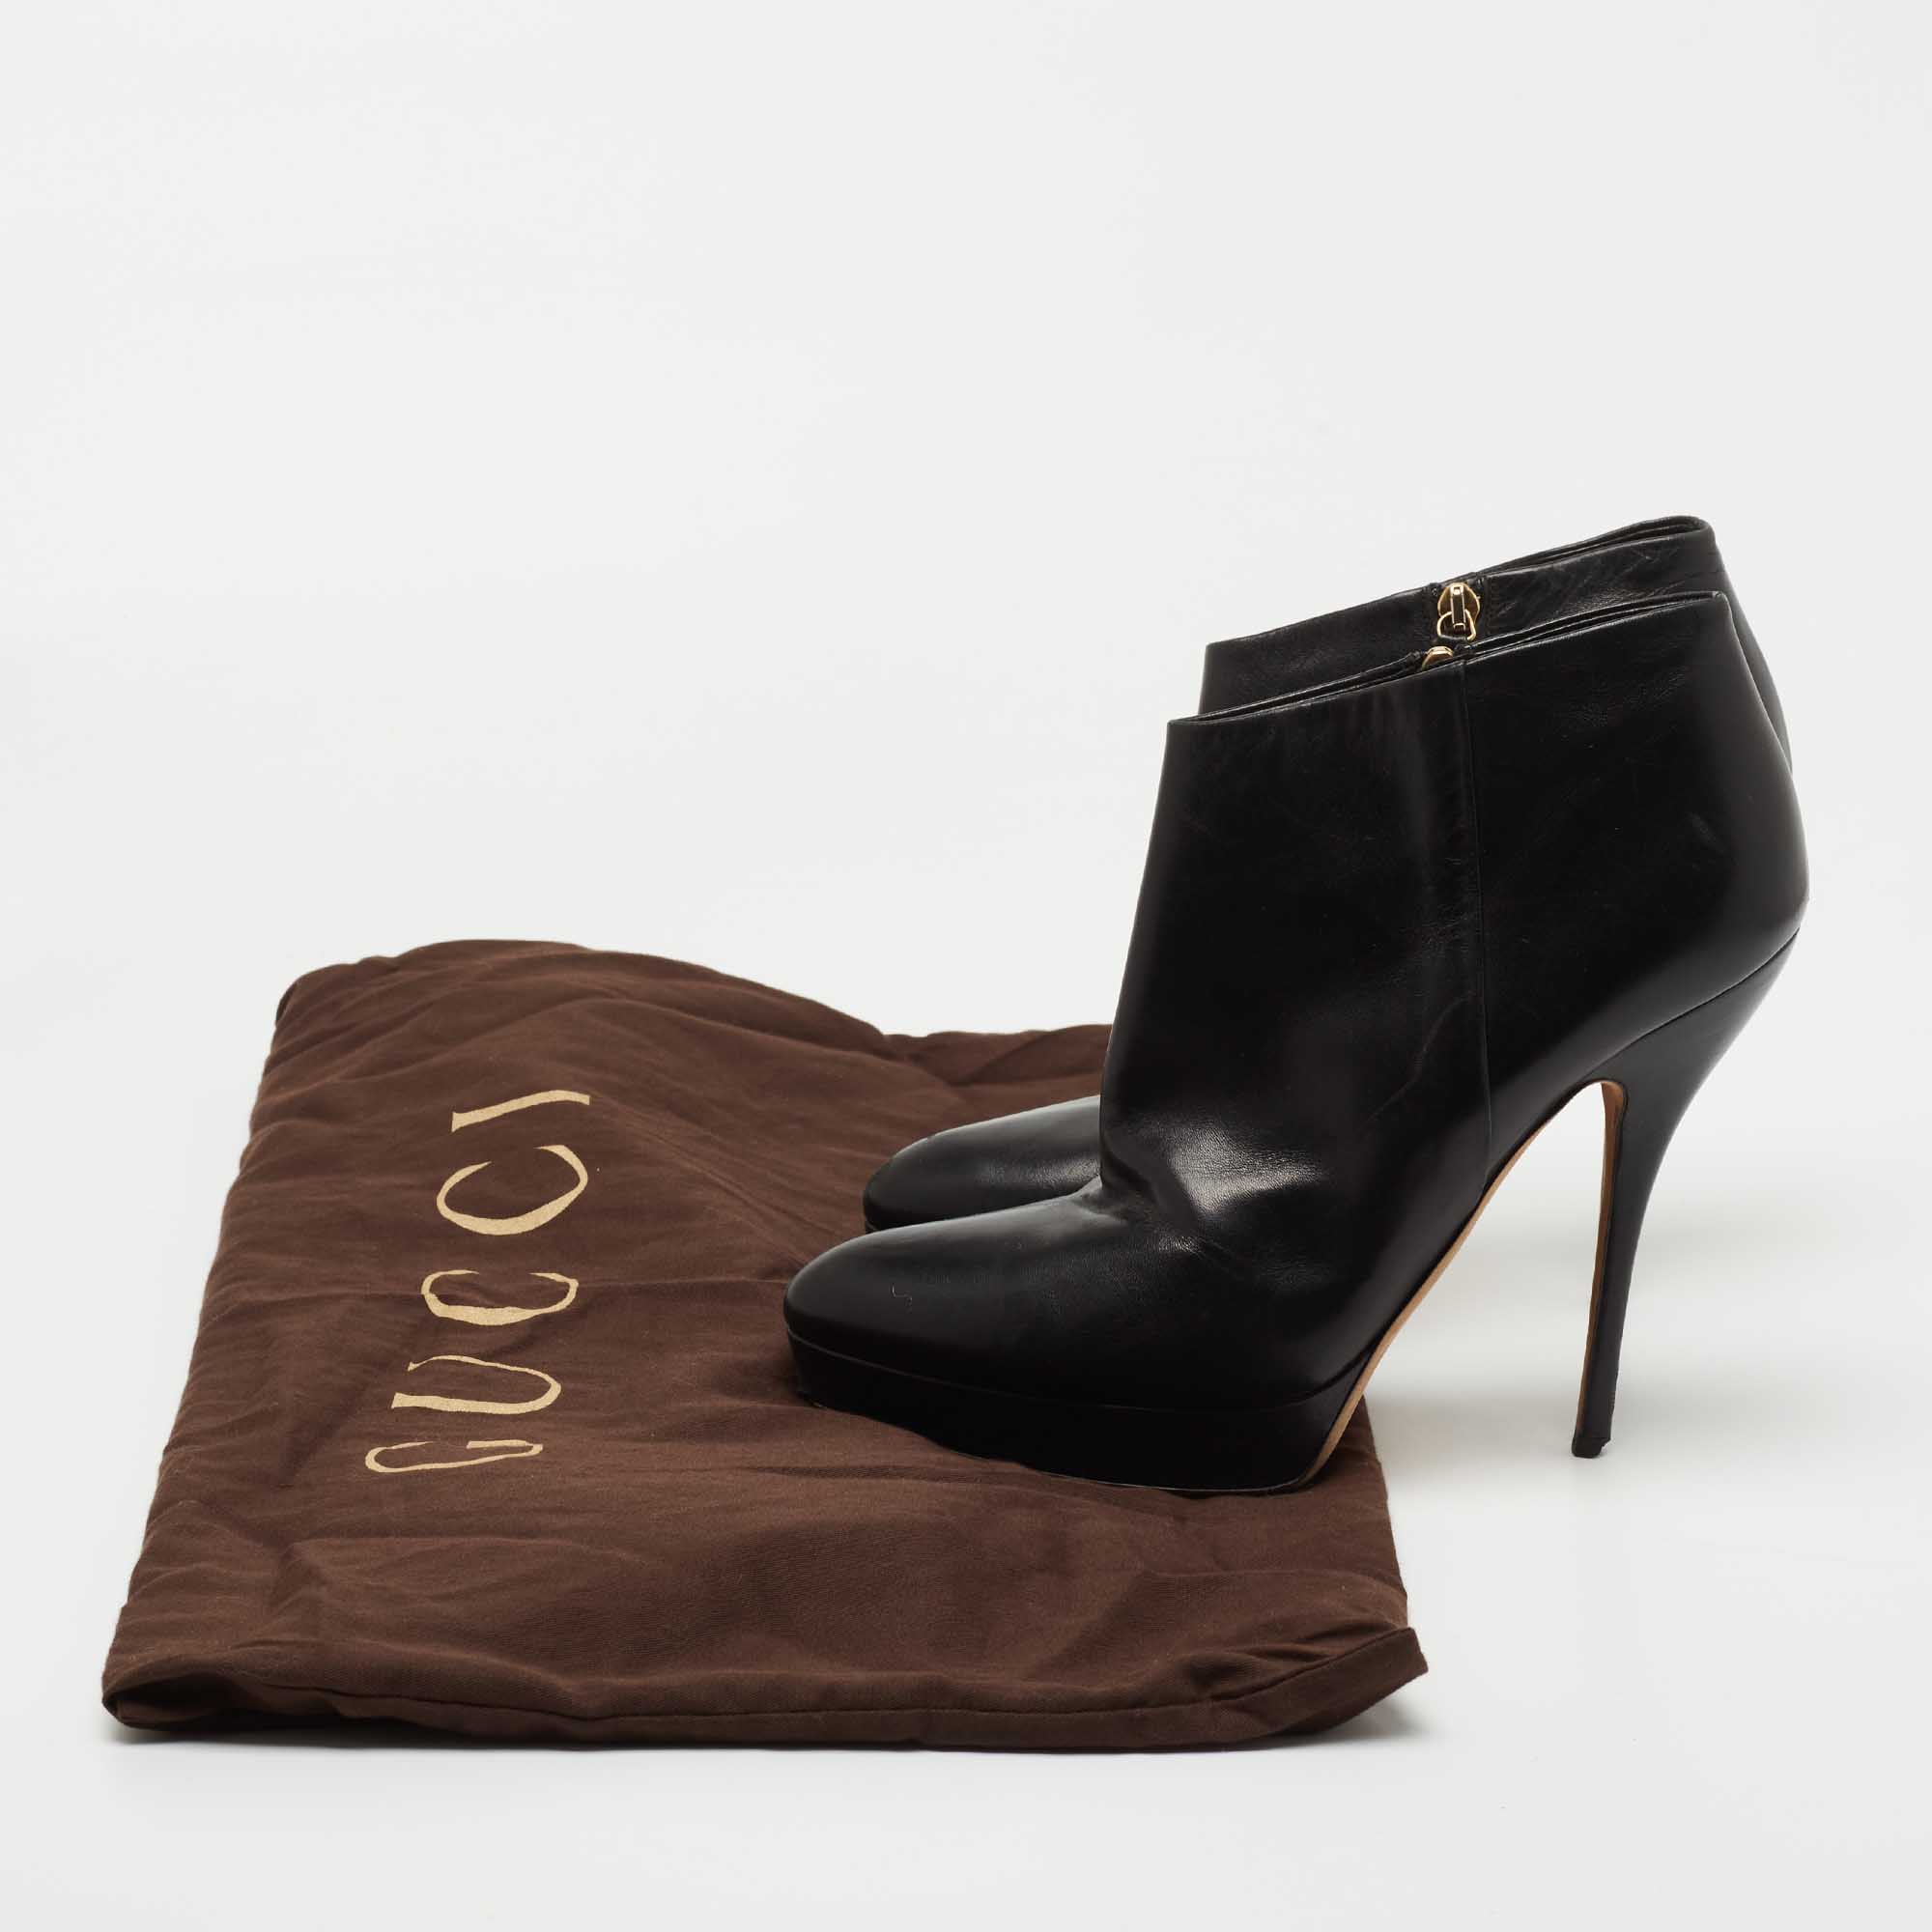 Gucci Black Leather Platform Ankle Booties Size 40